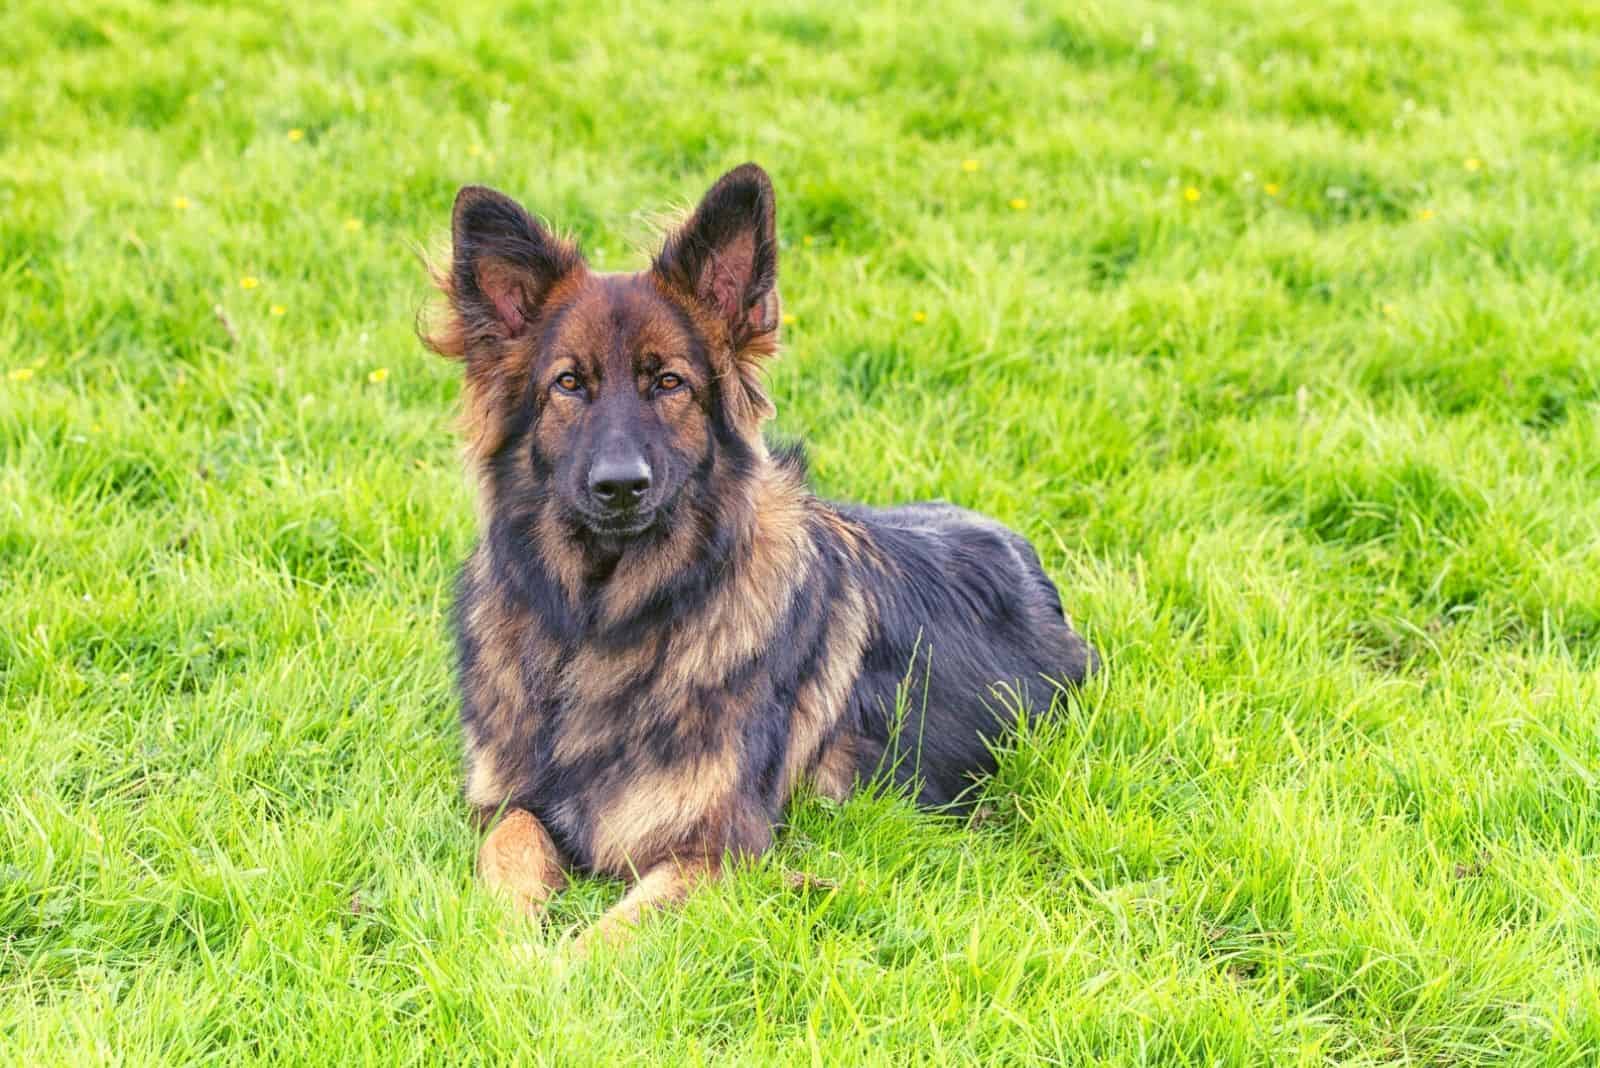 sable German Shepherd Dog laid on grass looking at the camera